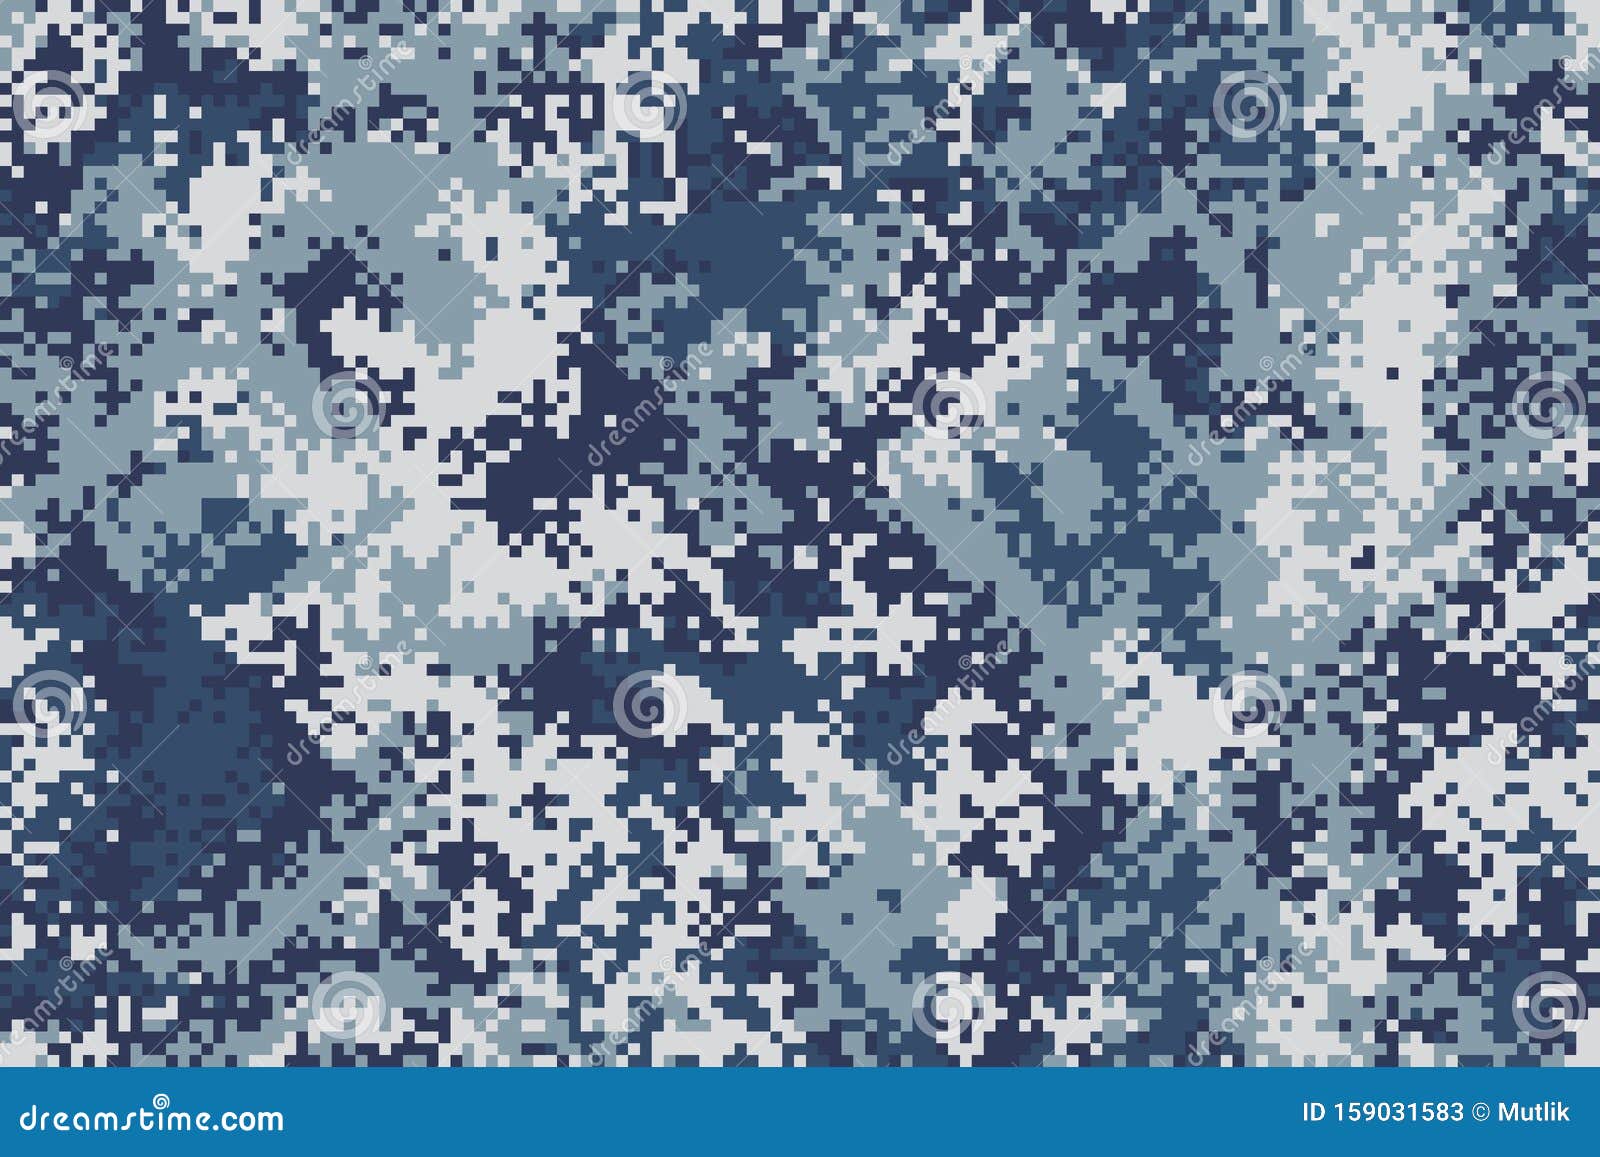 Original Pixel Seamless Marine Army Camouflage for Your Design Stock ...